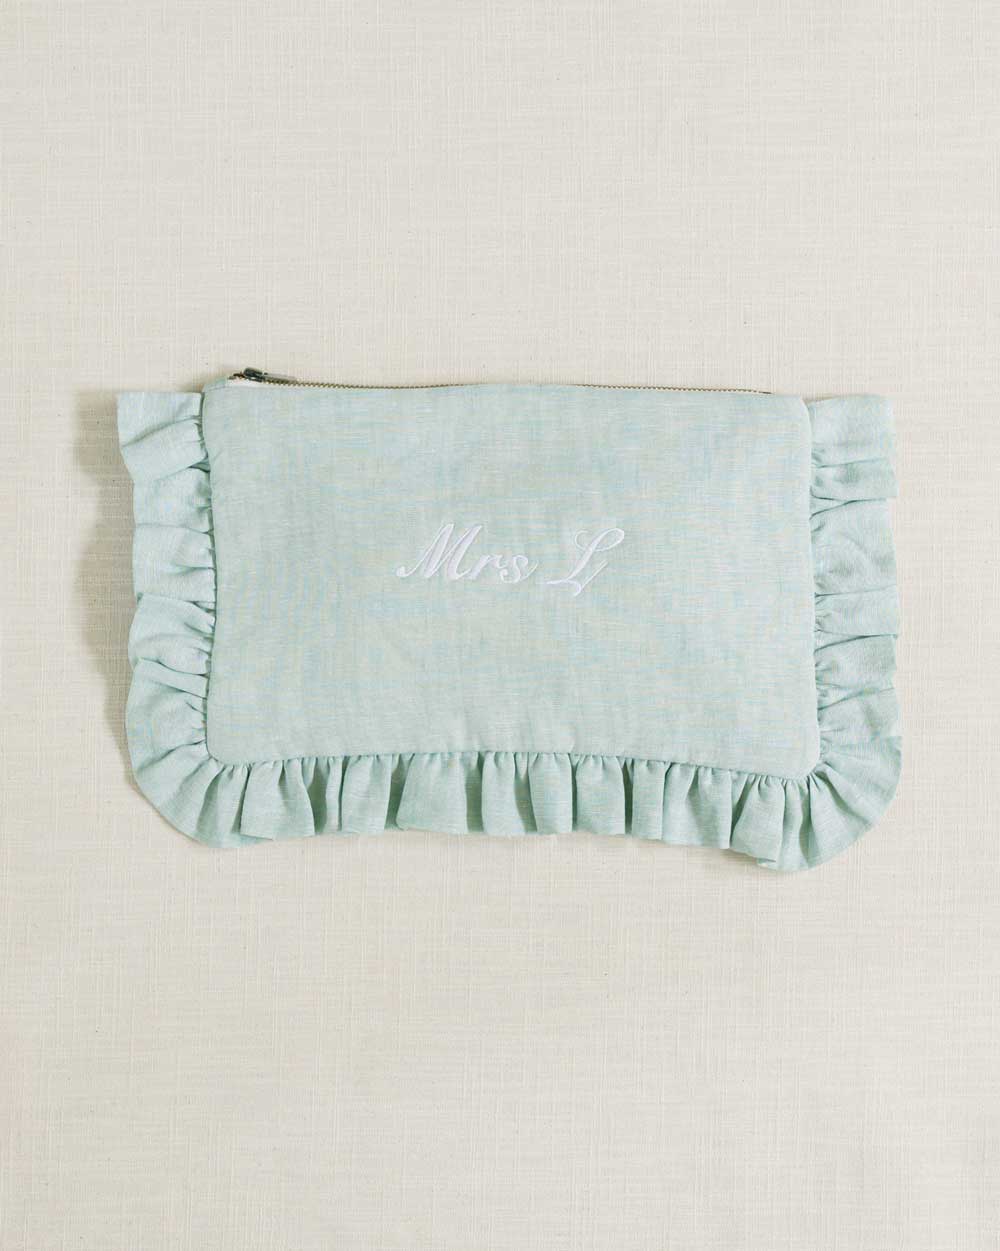 The Mint Green Ruffled Pouch